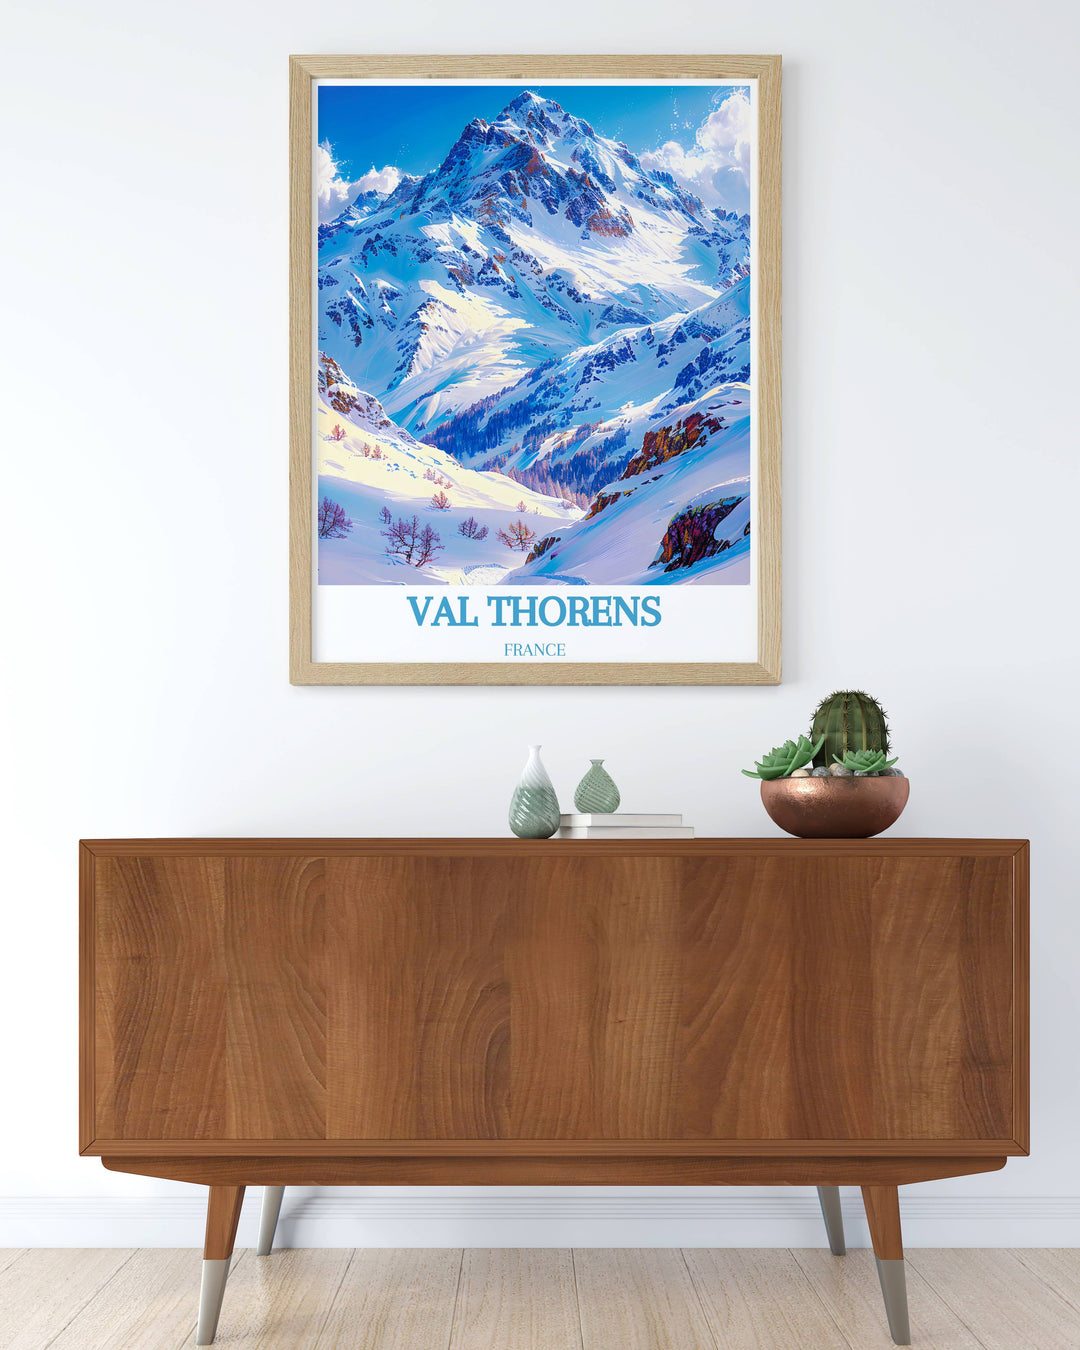 Stunning travel poster of Cime Caron, highlighting the snow covered peaks and vibrant alpine village of Val Thorens. Adds a touch of adventure and elegance to your wall decor.